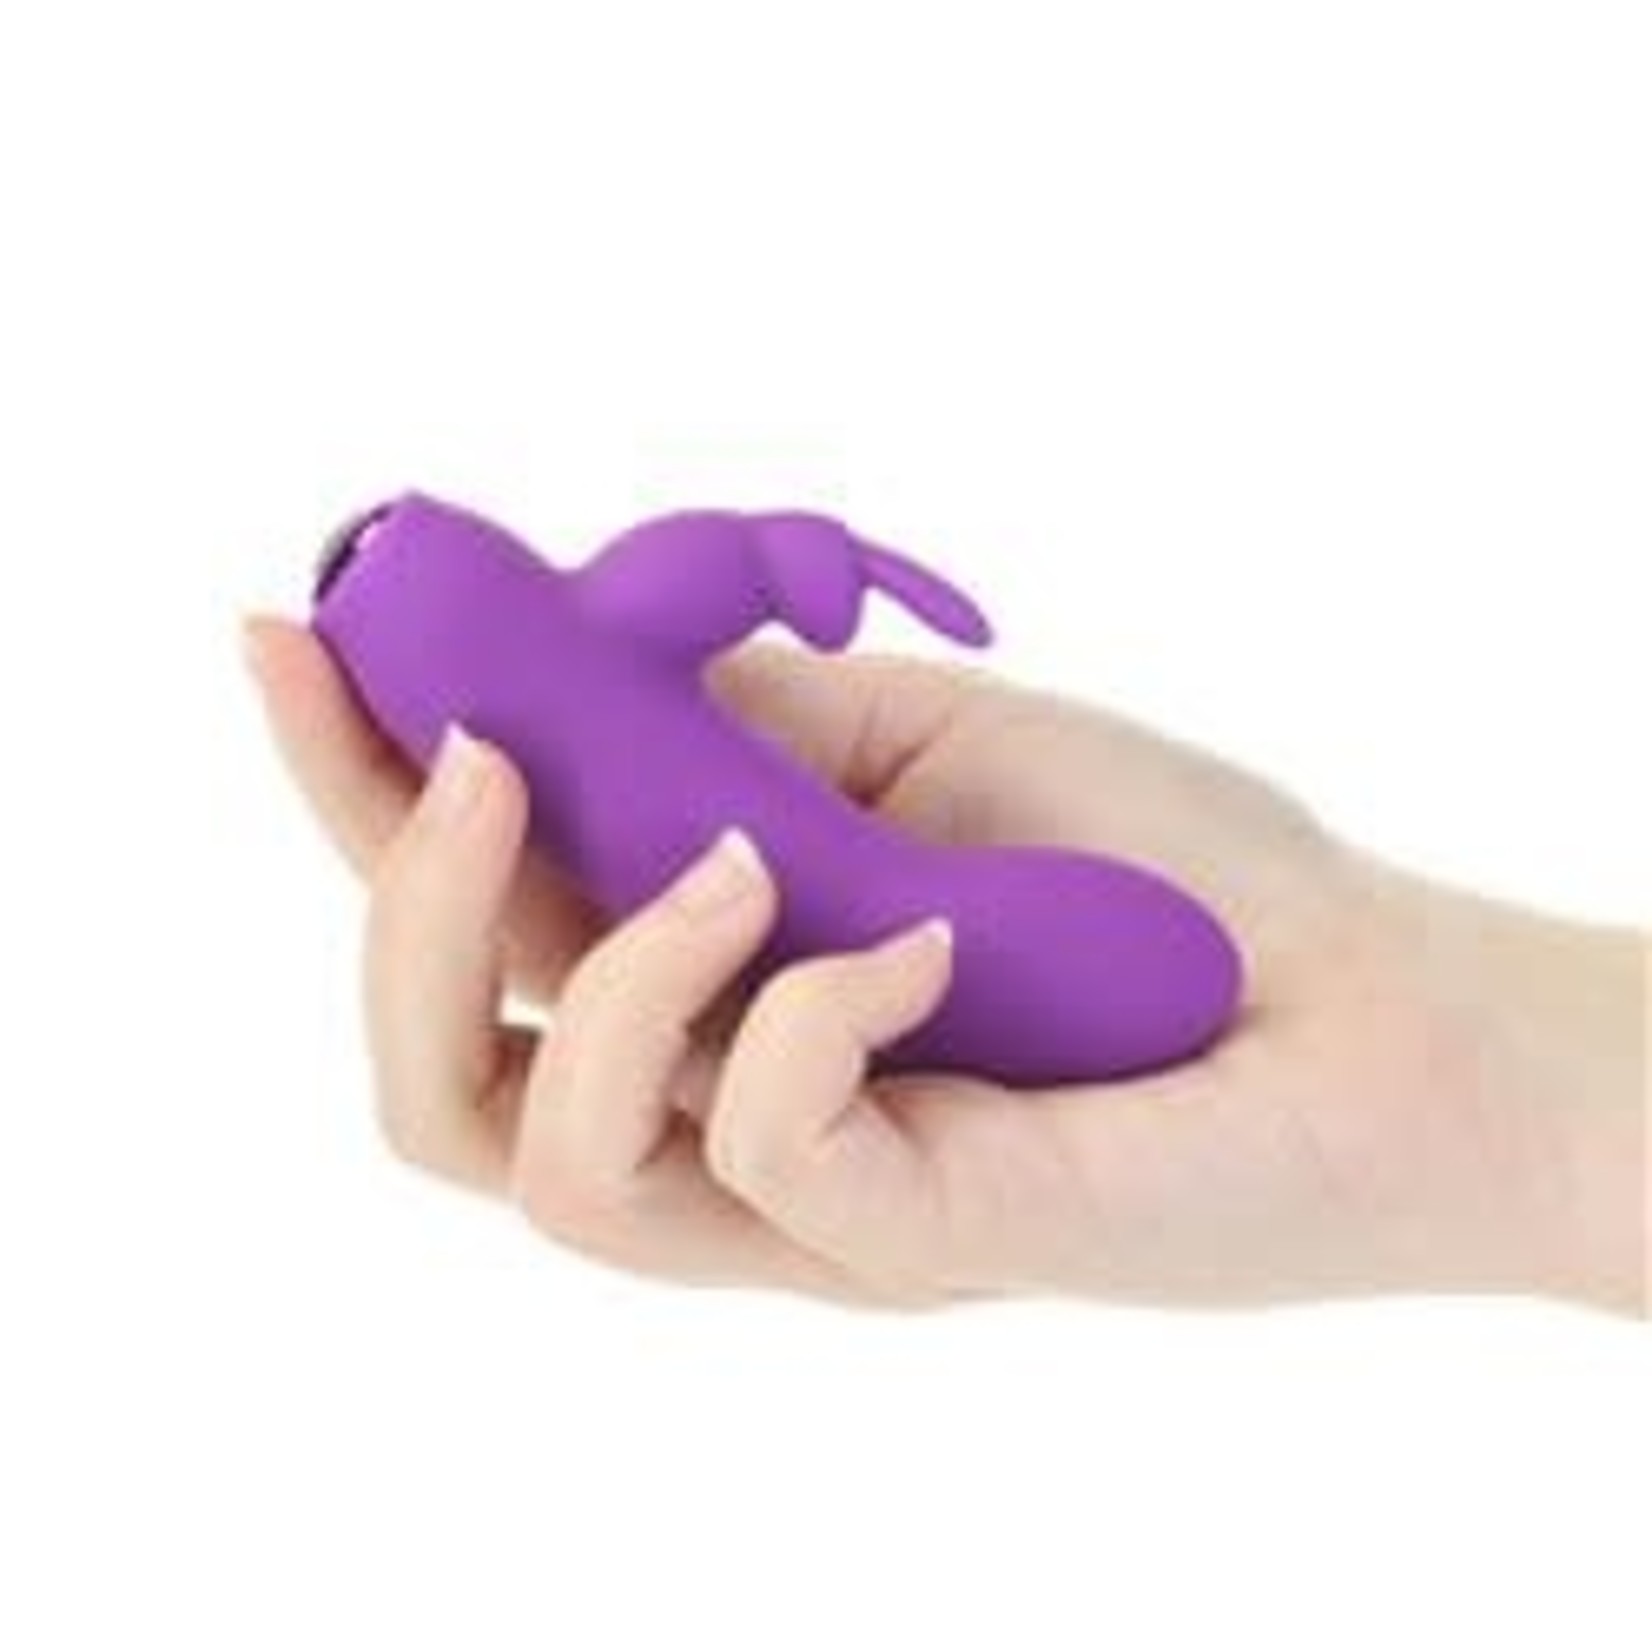 BMS - ALICE'S BUNNY - RECHARGEABLE BULLET WITH REMOVABLE RABBIT SLEEVE - PURPLE